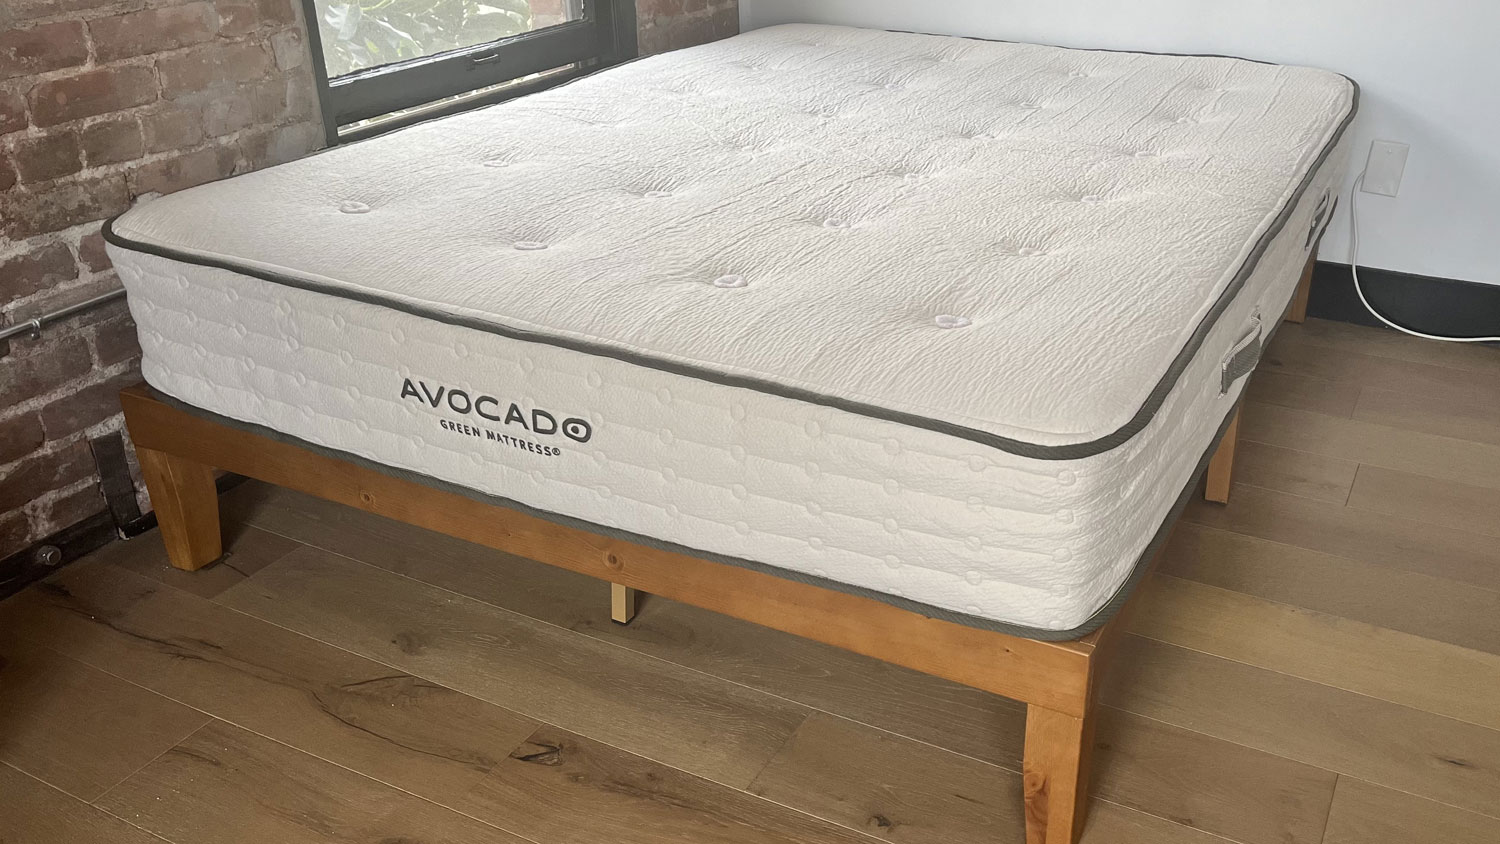 The Avocado Green mattress on a bed